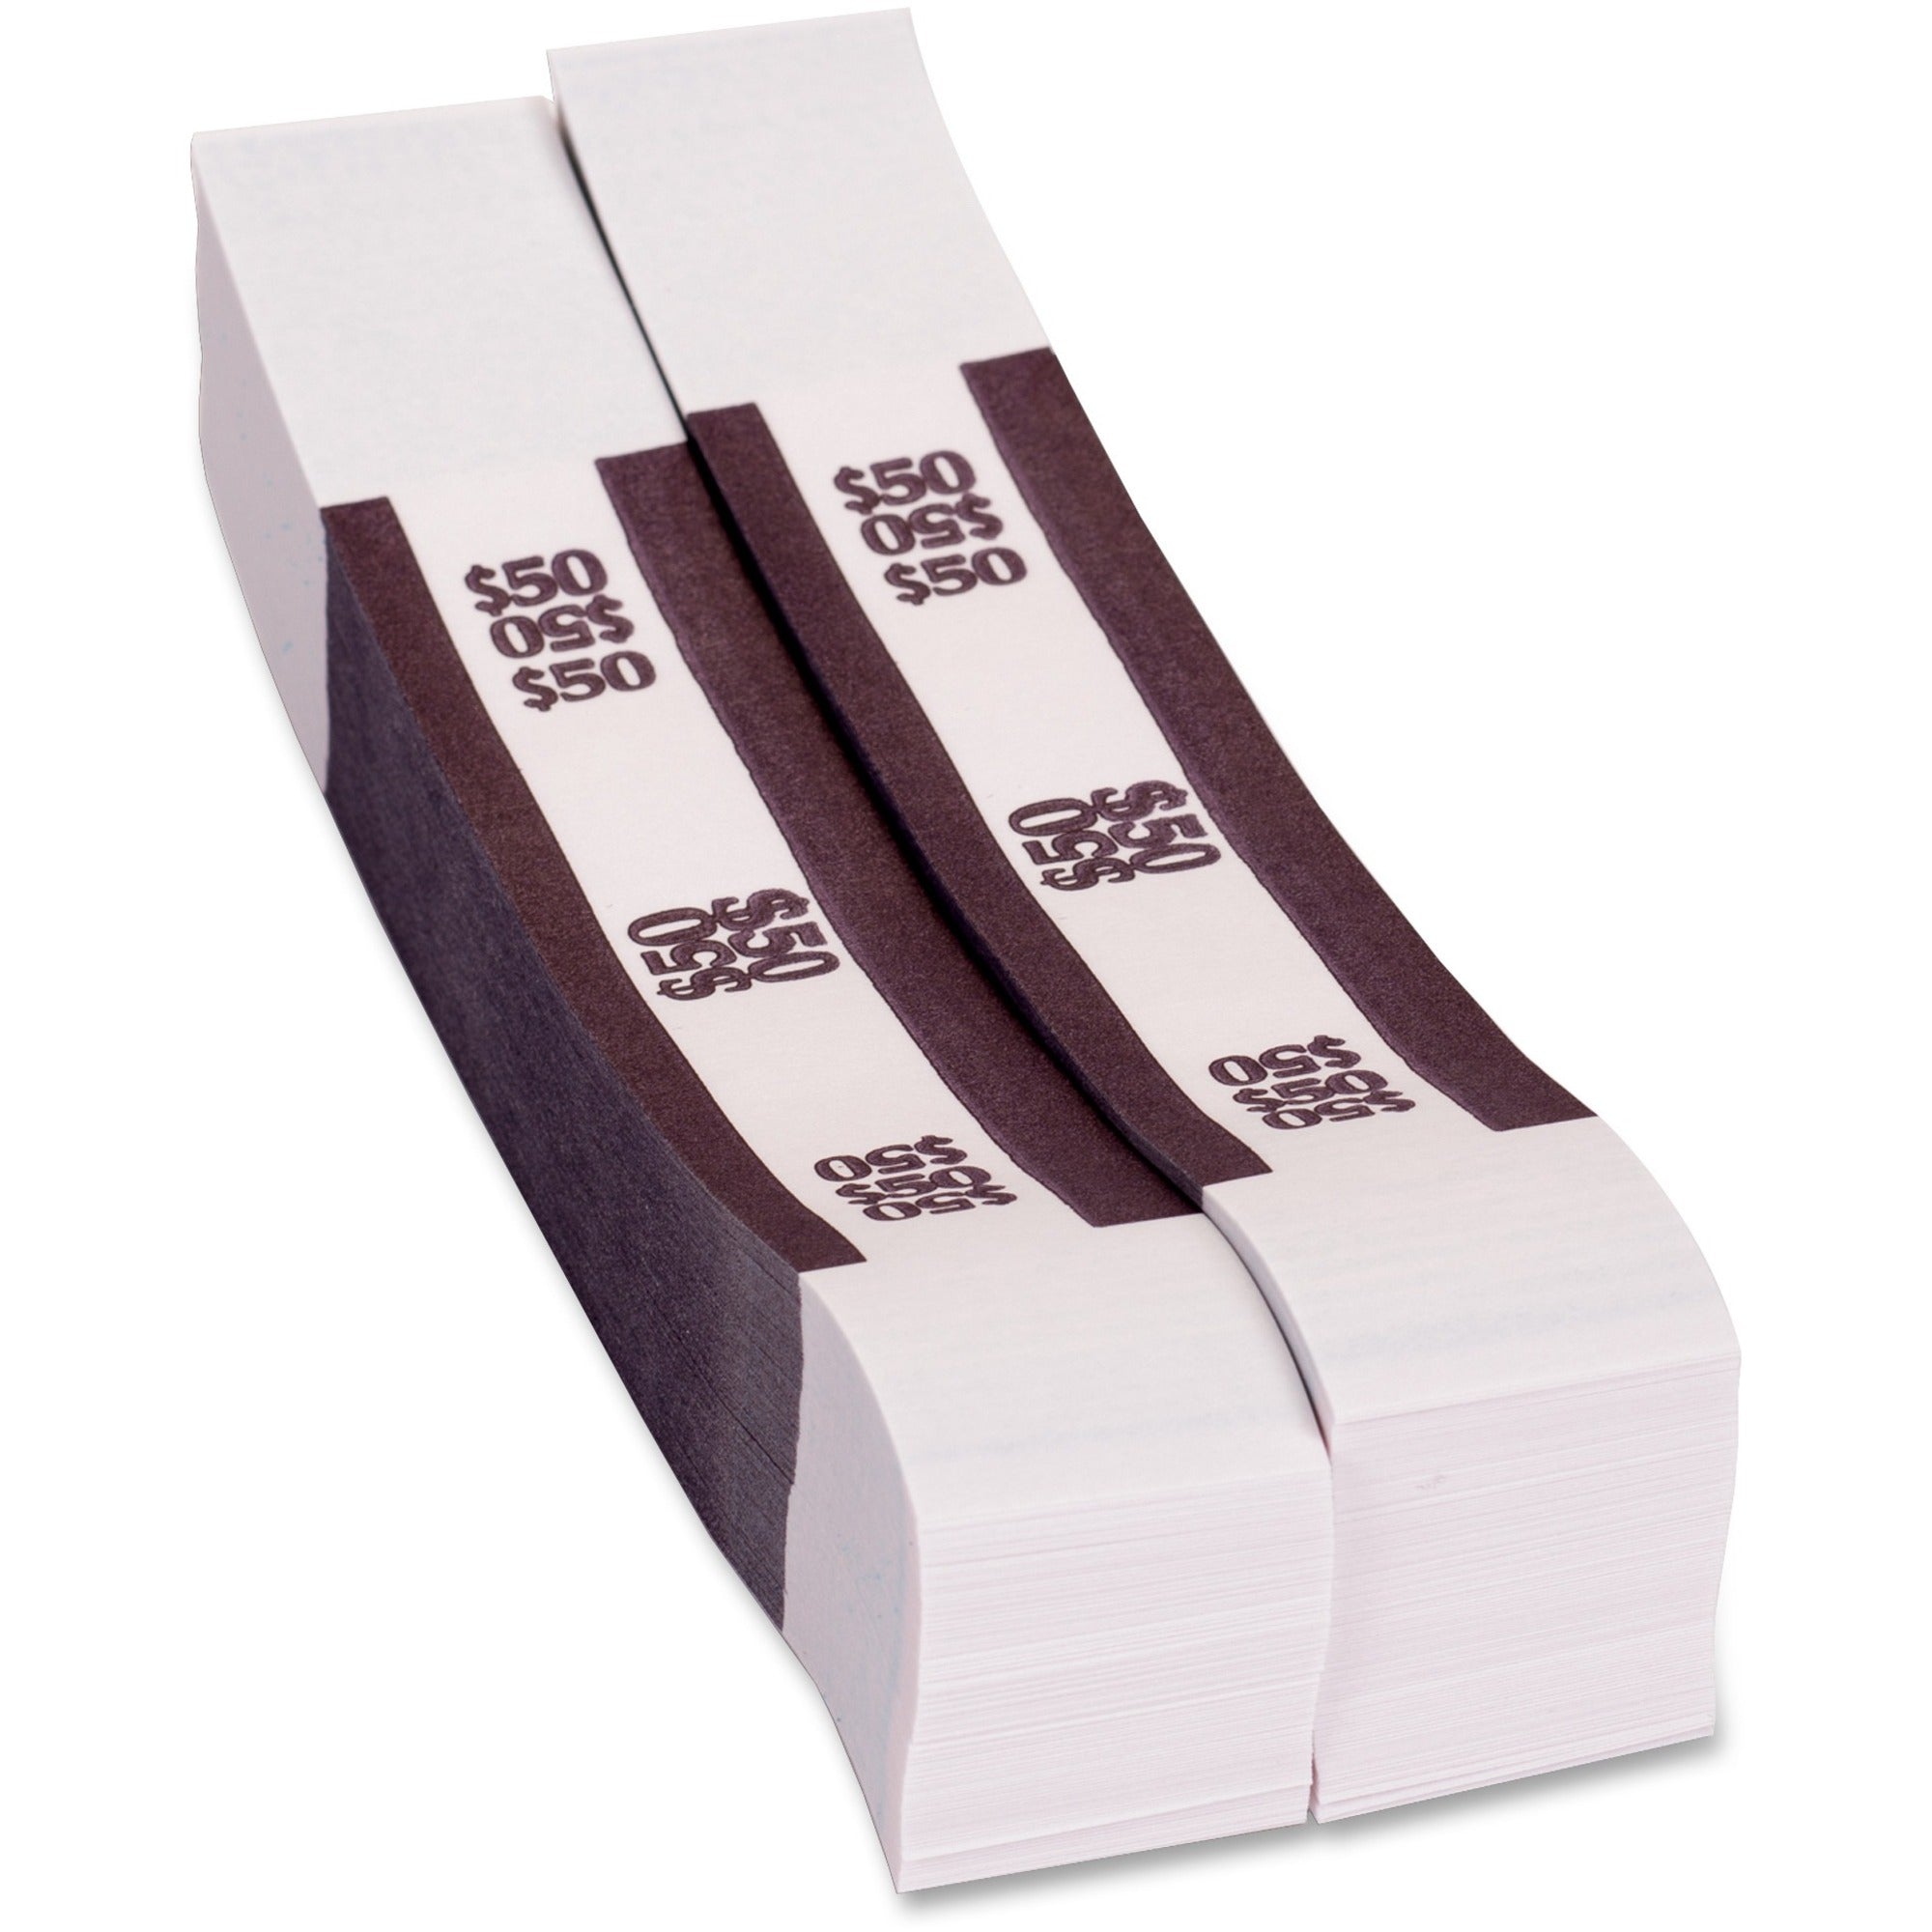 pap-r-currency-straps-125-width-self-sealing-self-adhesive-durable-20-lb-basis-weight-kraft-white-violet-1000-pack_pqp400075 - 1